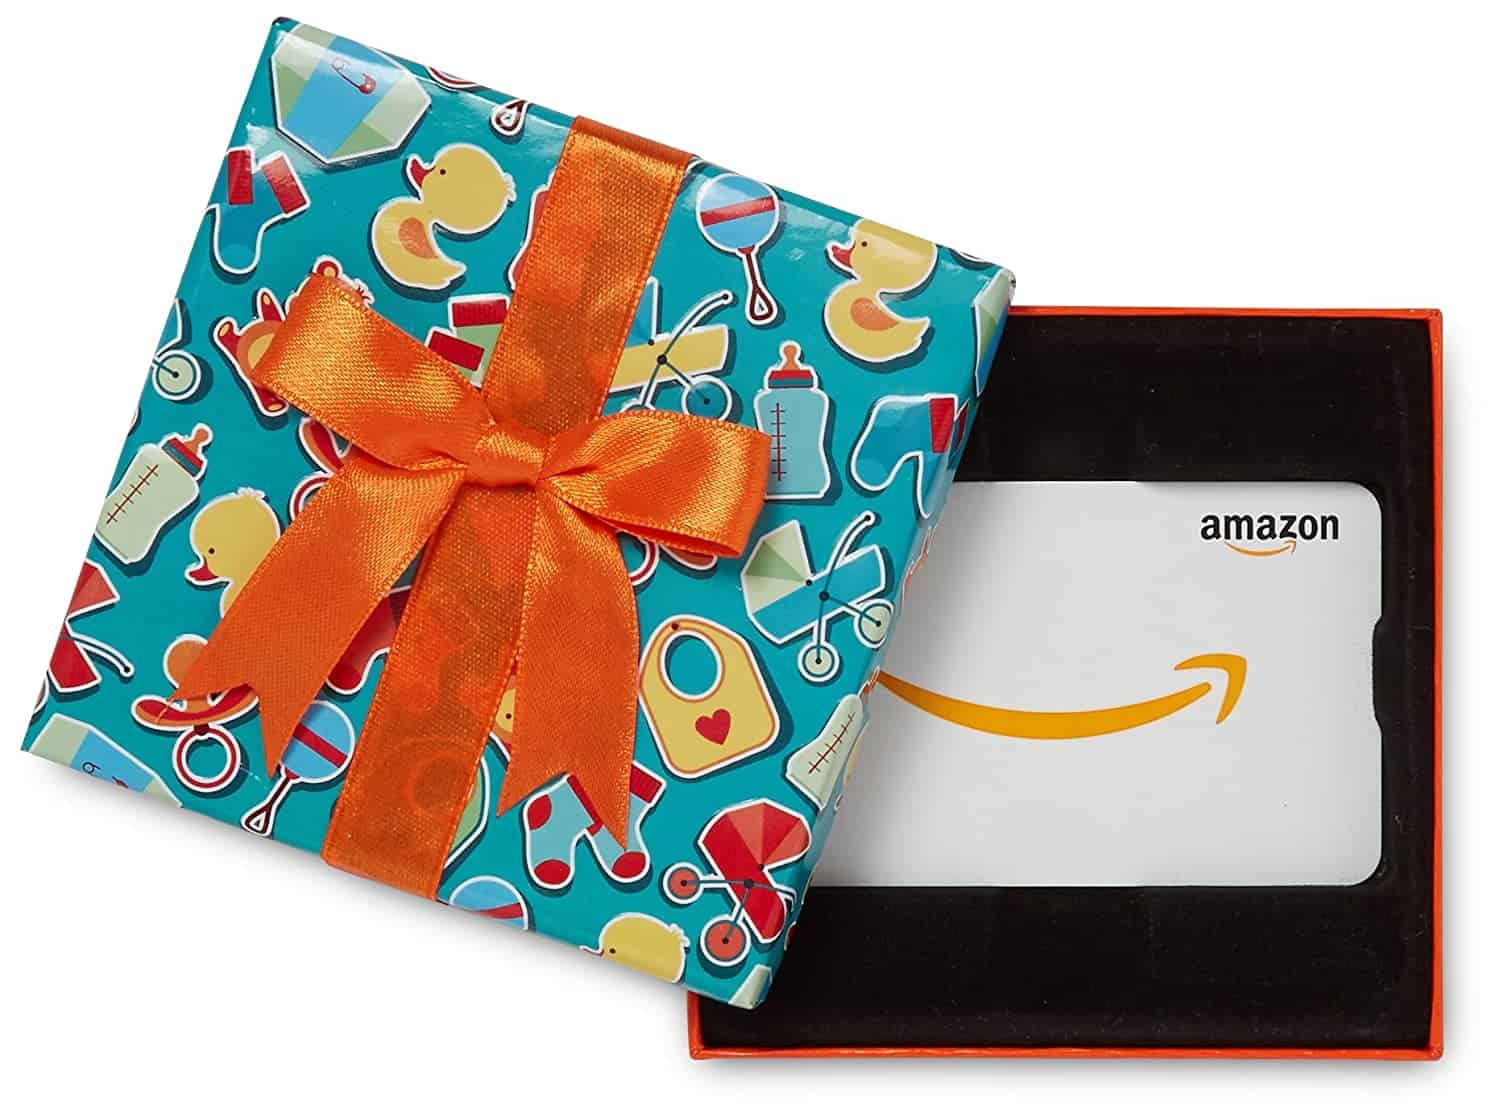 Amazon.com Gift Card in a Baby Icons Box